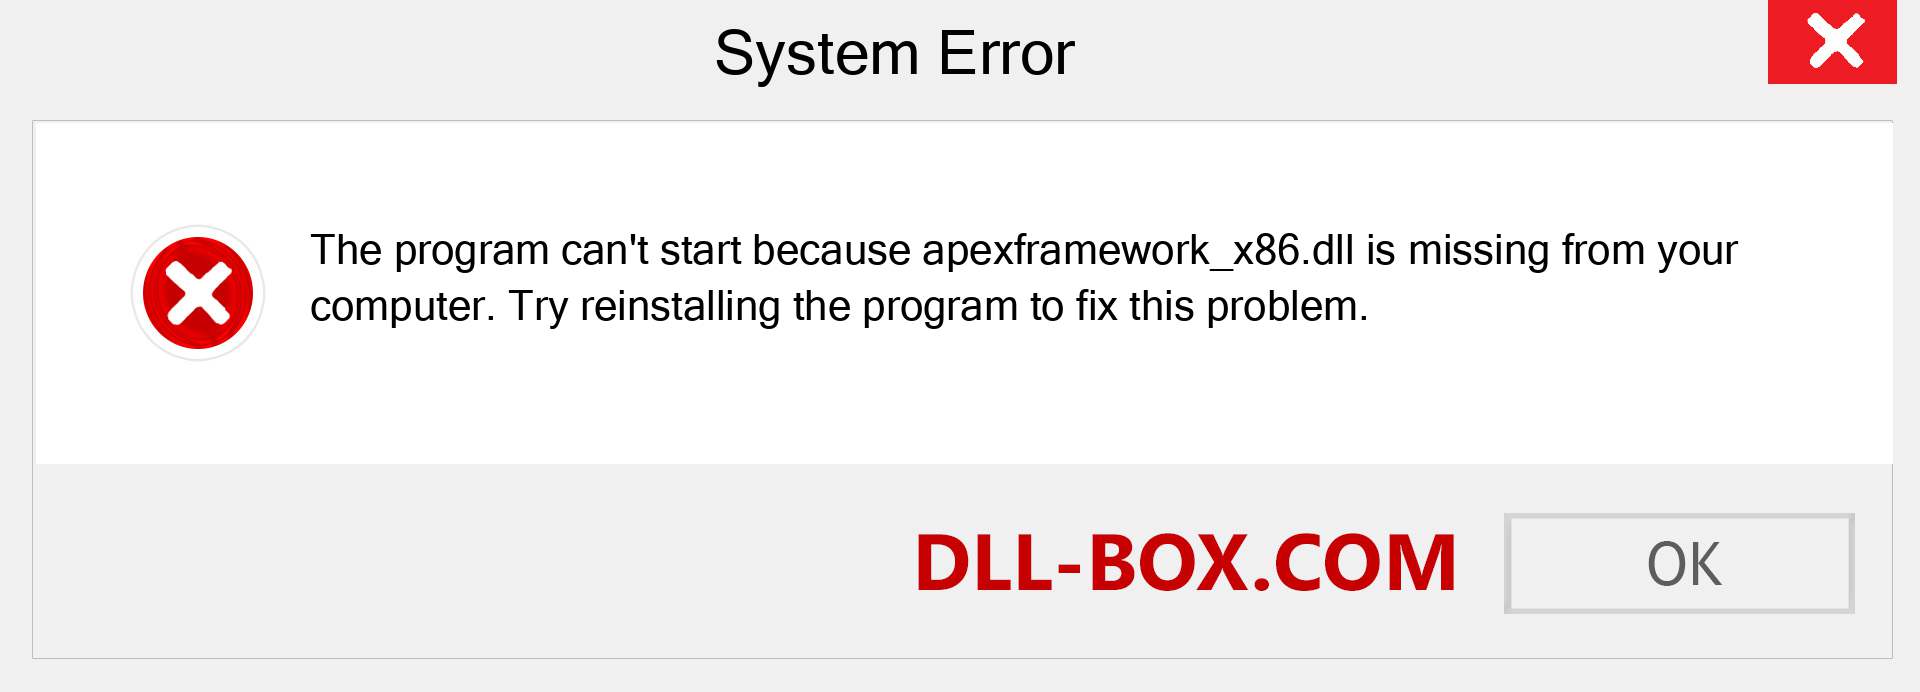  apexframework_x86.dll file is missing?. Download for Windows 7, 8, 10 - Fix  apexframework_x86 dll Missing Error on Windows, photos, images